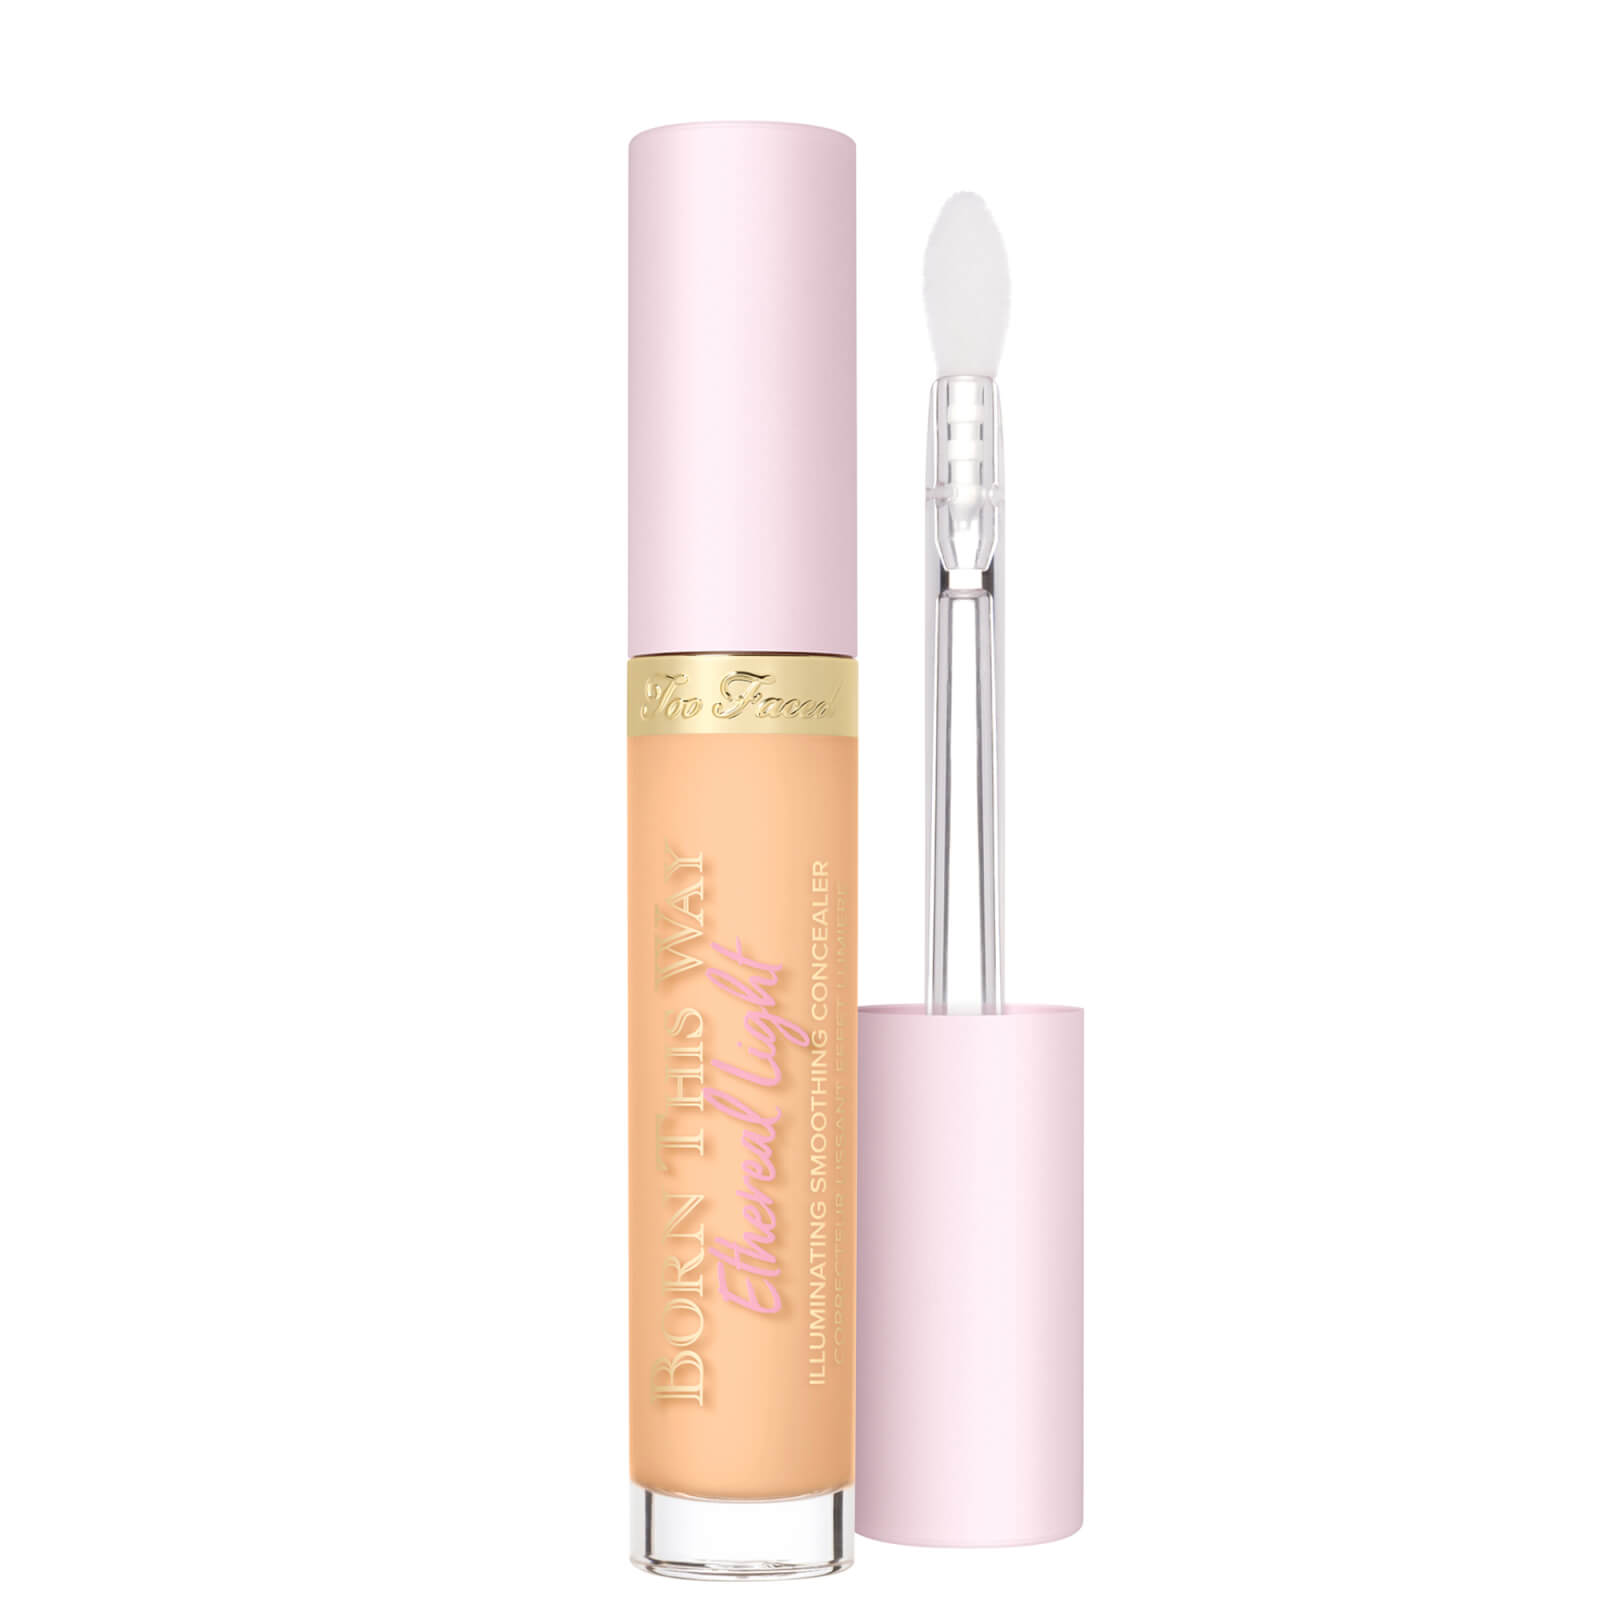 Too Faced Born This Way Ethereal Light Illuminating Smoothing Concealer 15ml (Various Shades) - Butter Croissant